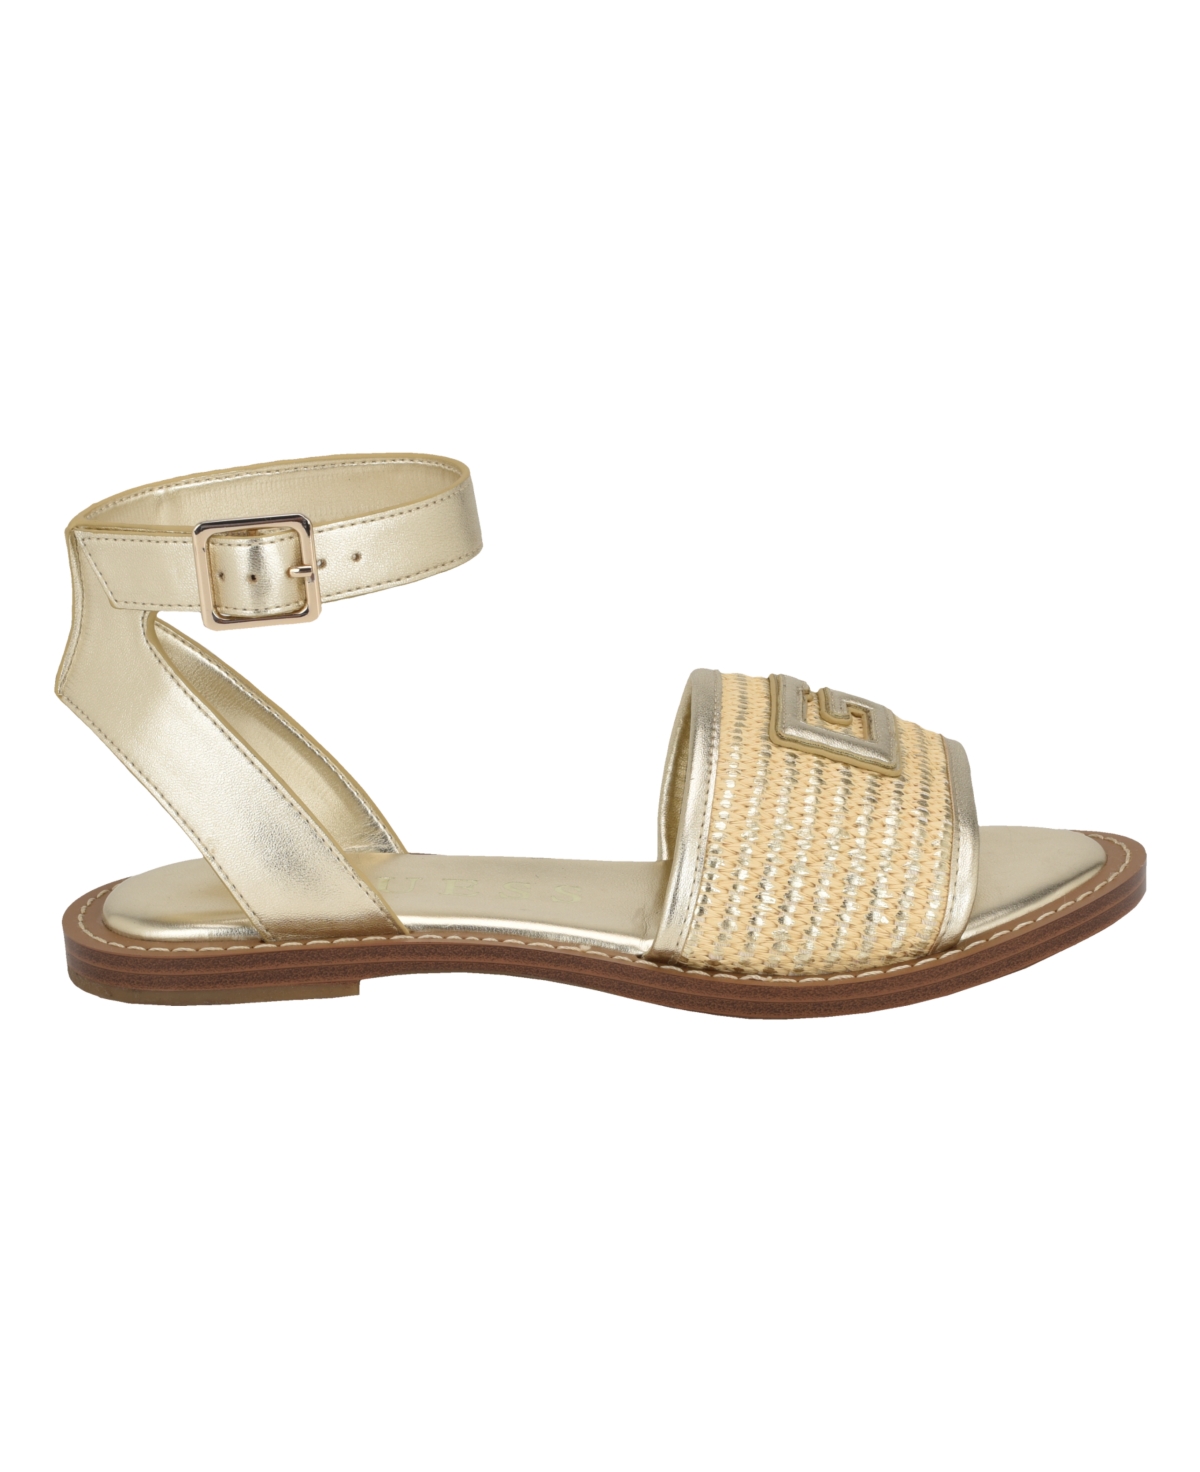 Women's Shay Logo One Band Sandal with Ankle Strap - Medium Brown